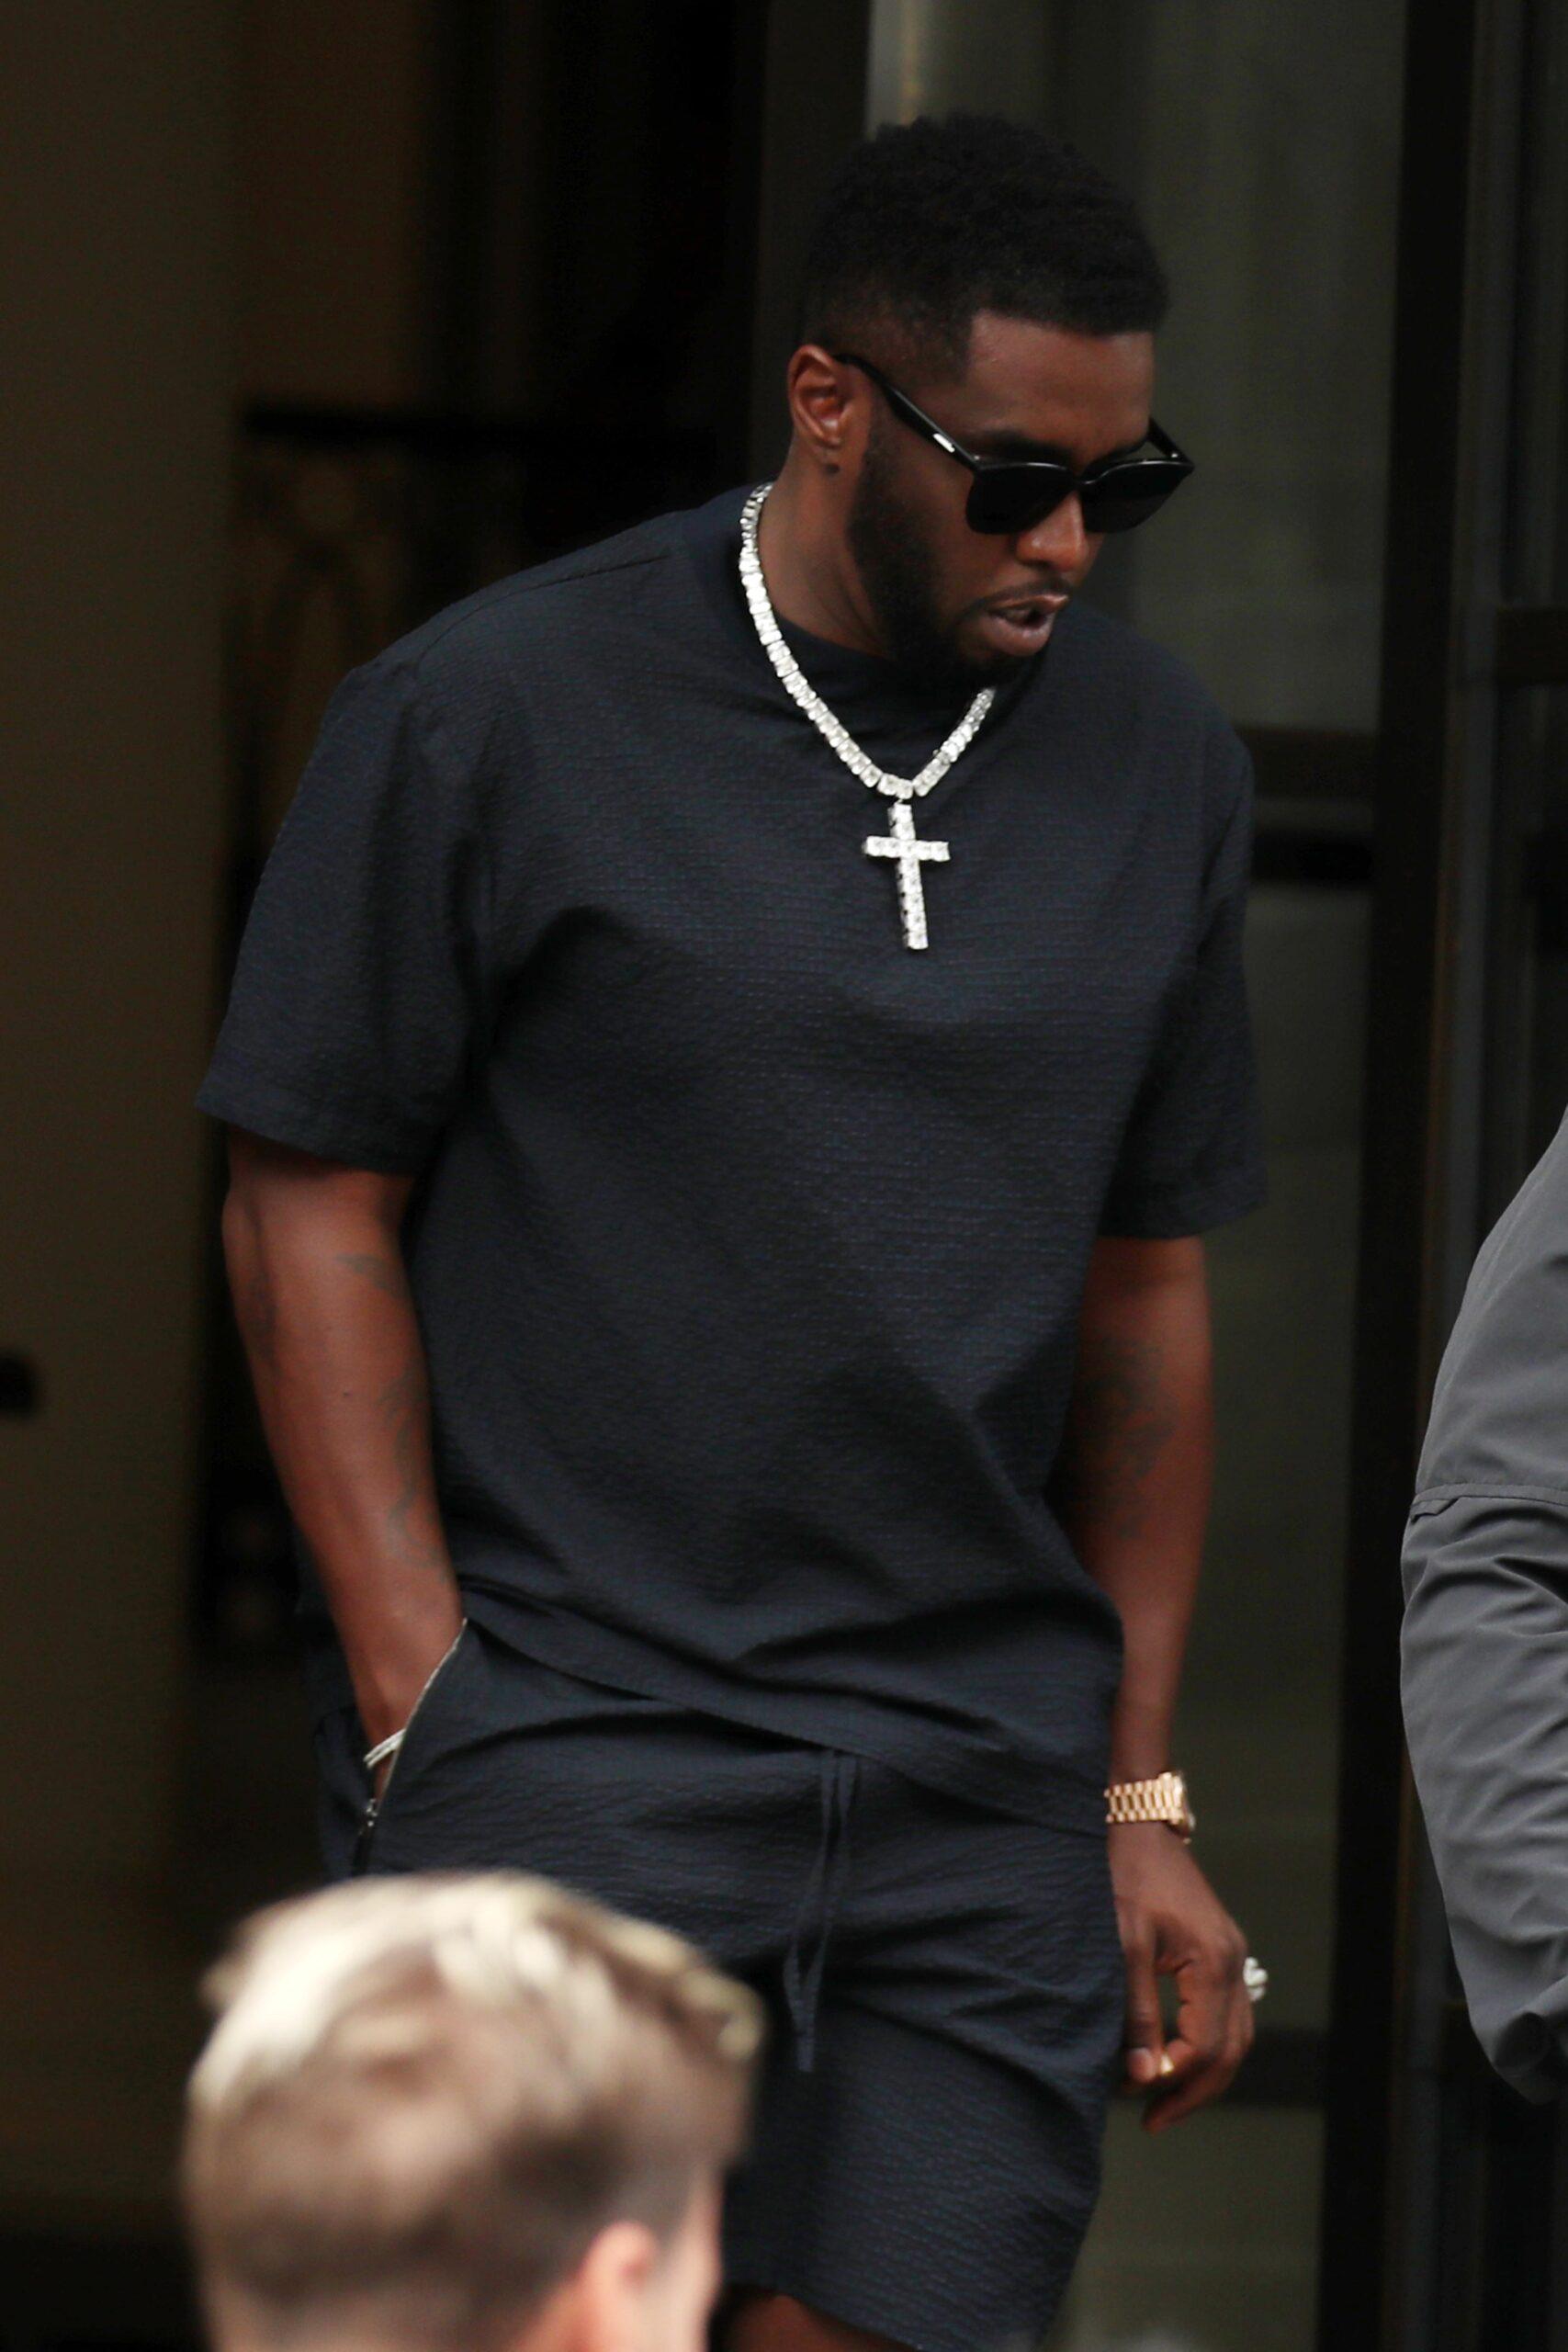 P Diddy leaving the Corinthia hotel